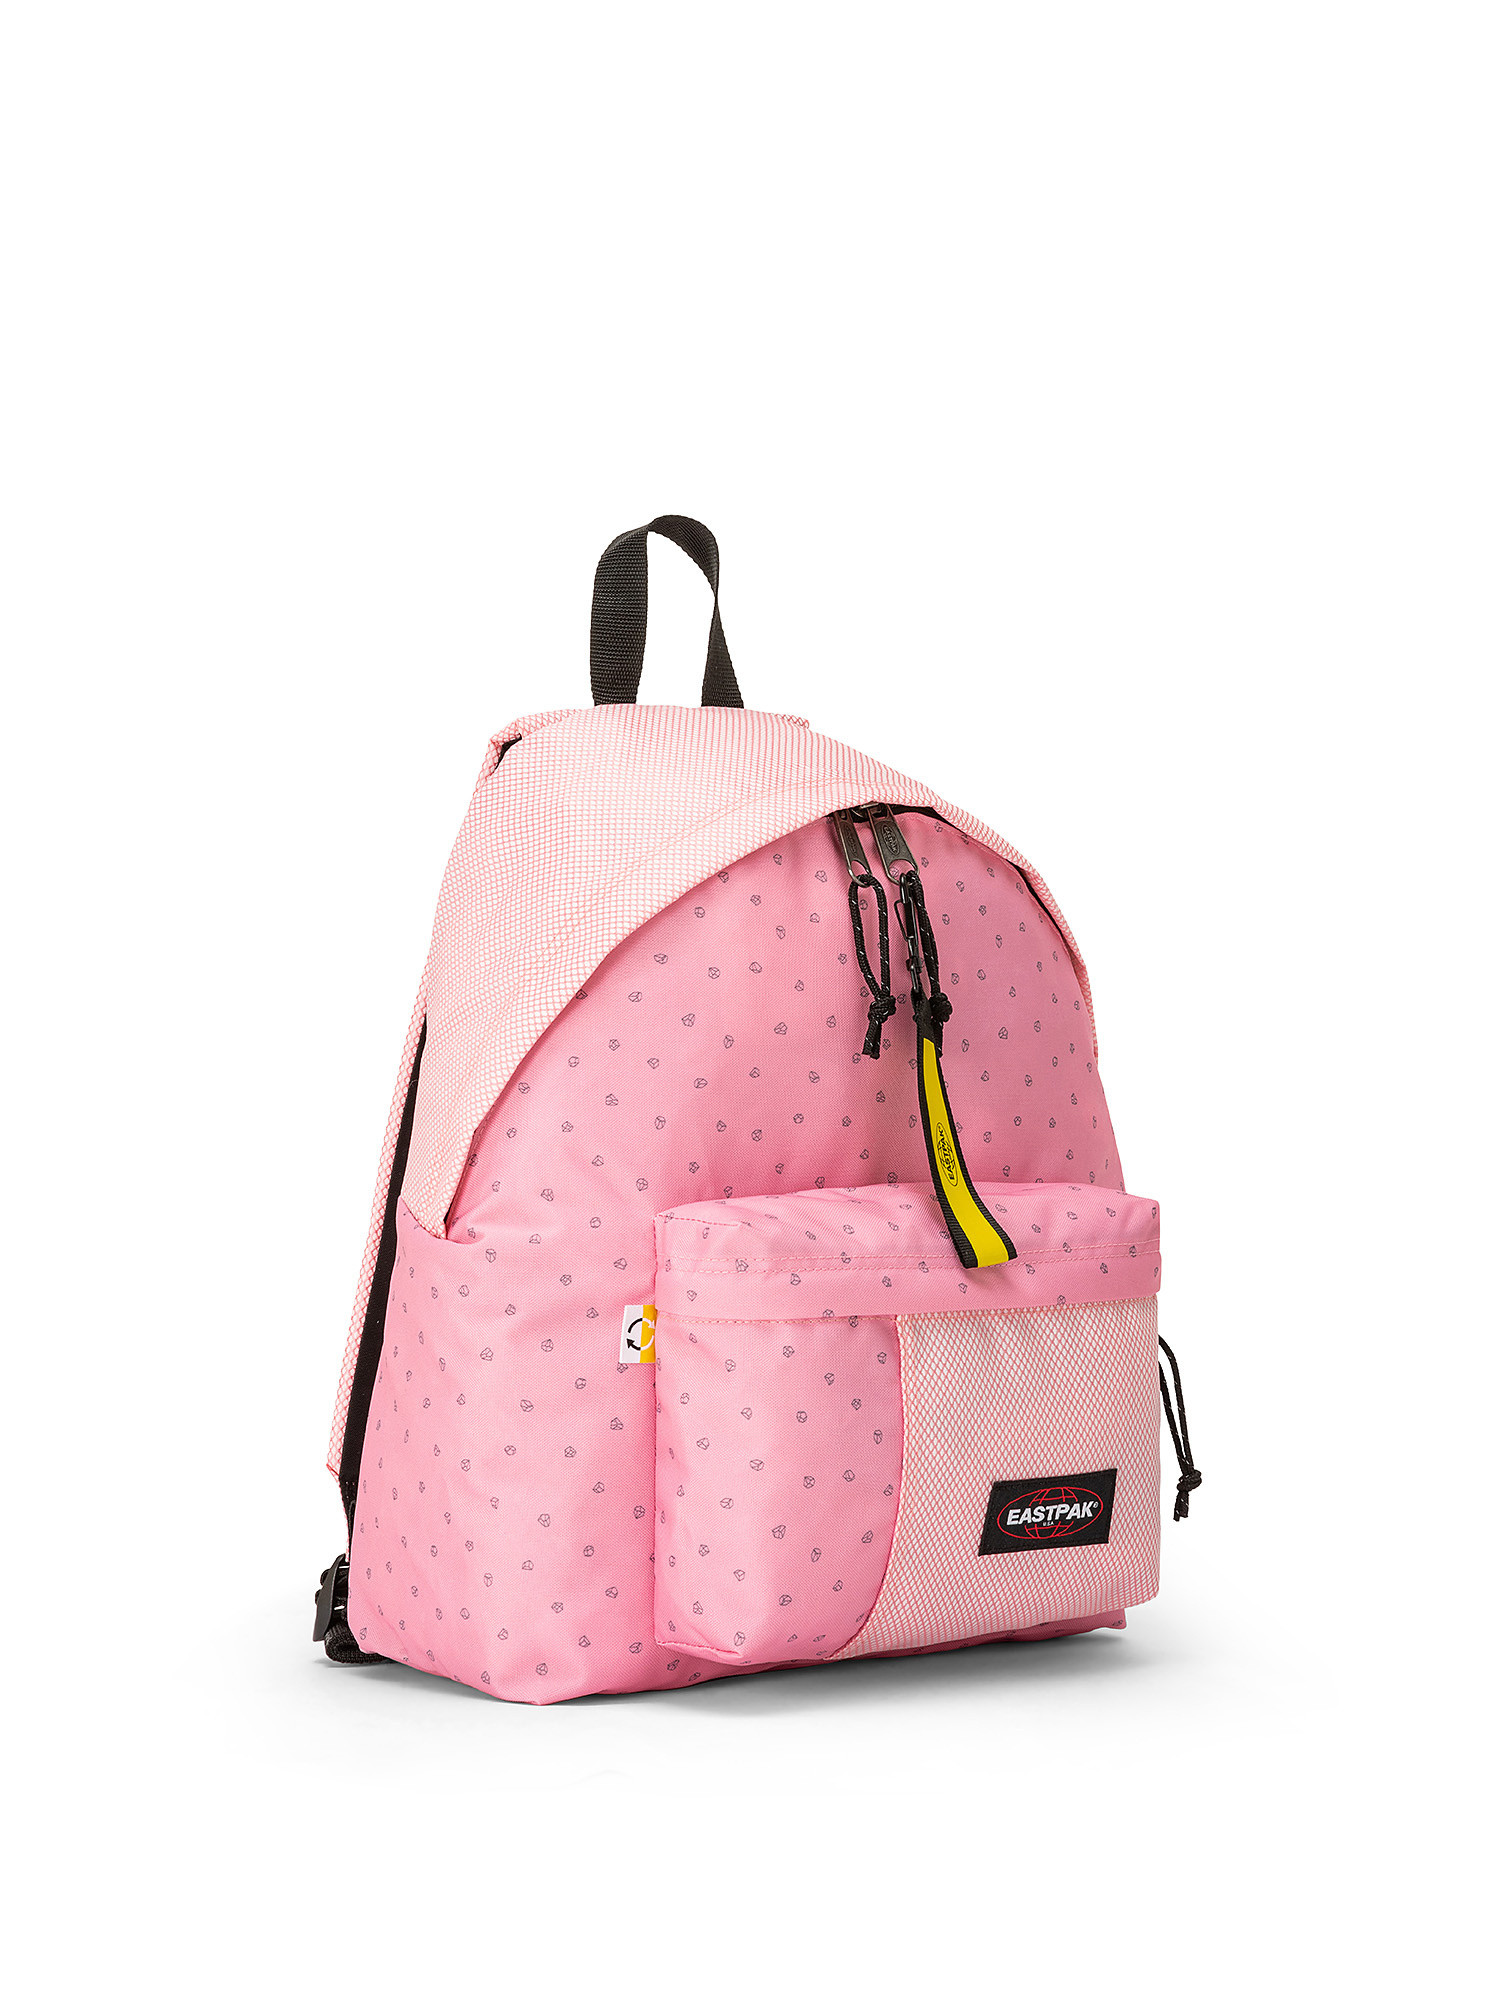 Backpack with laptop compartment and removable key ring, Pink, large image number 1